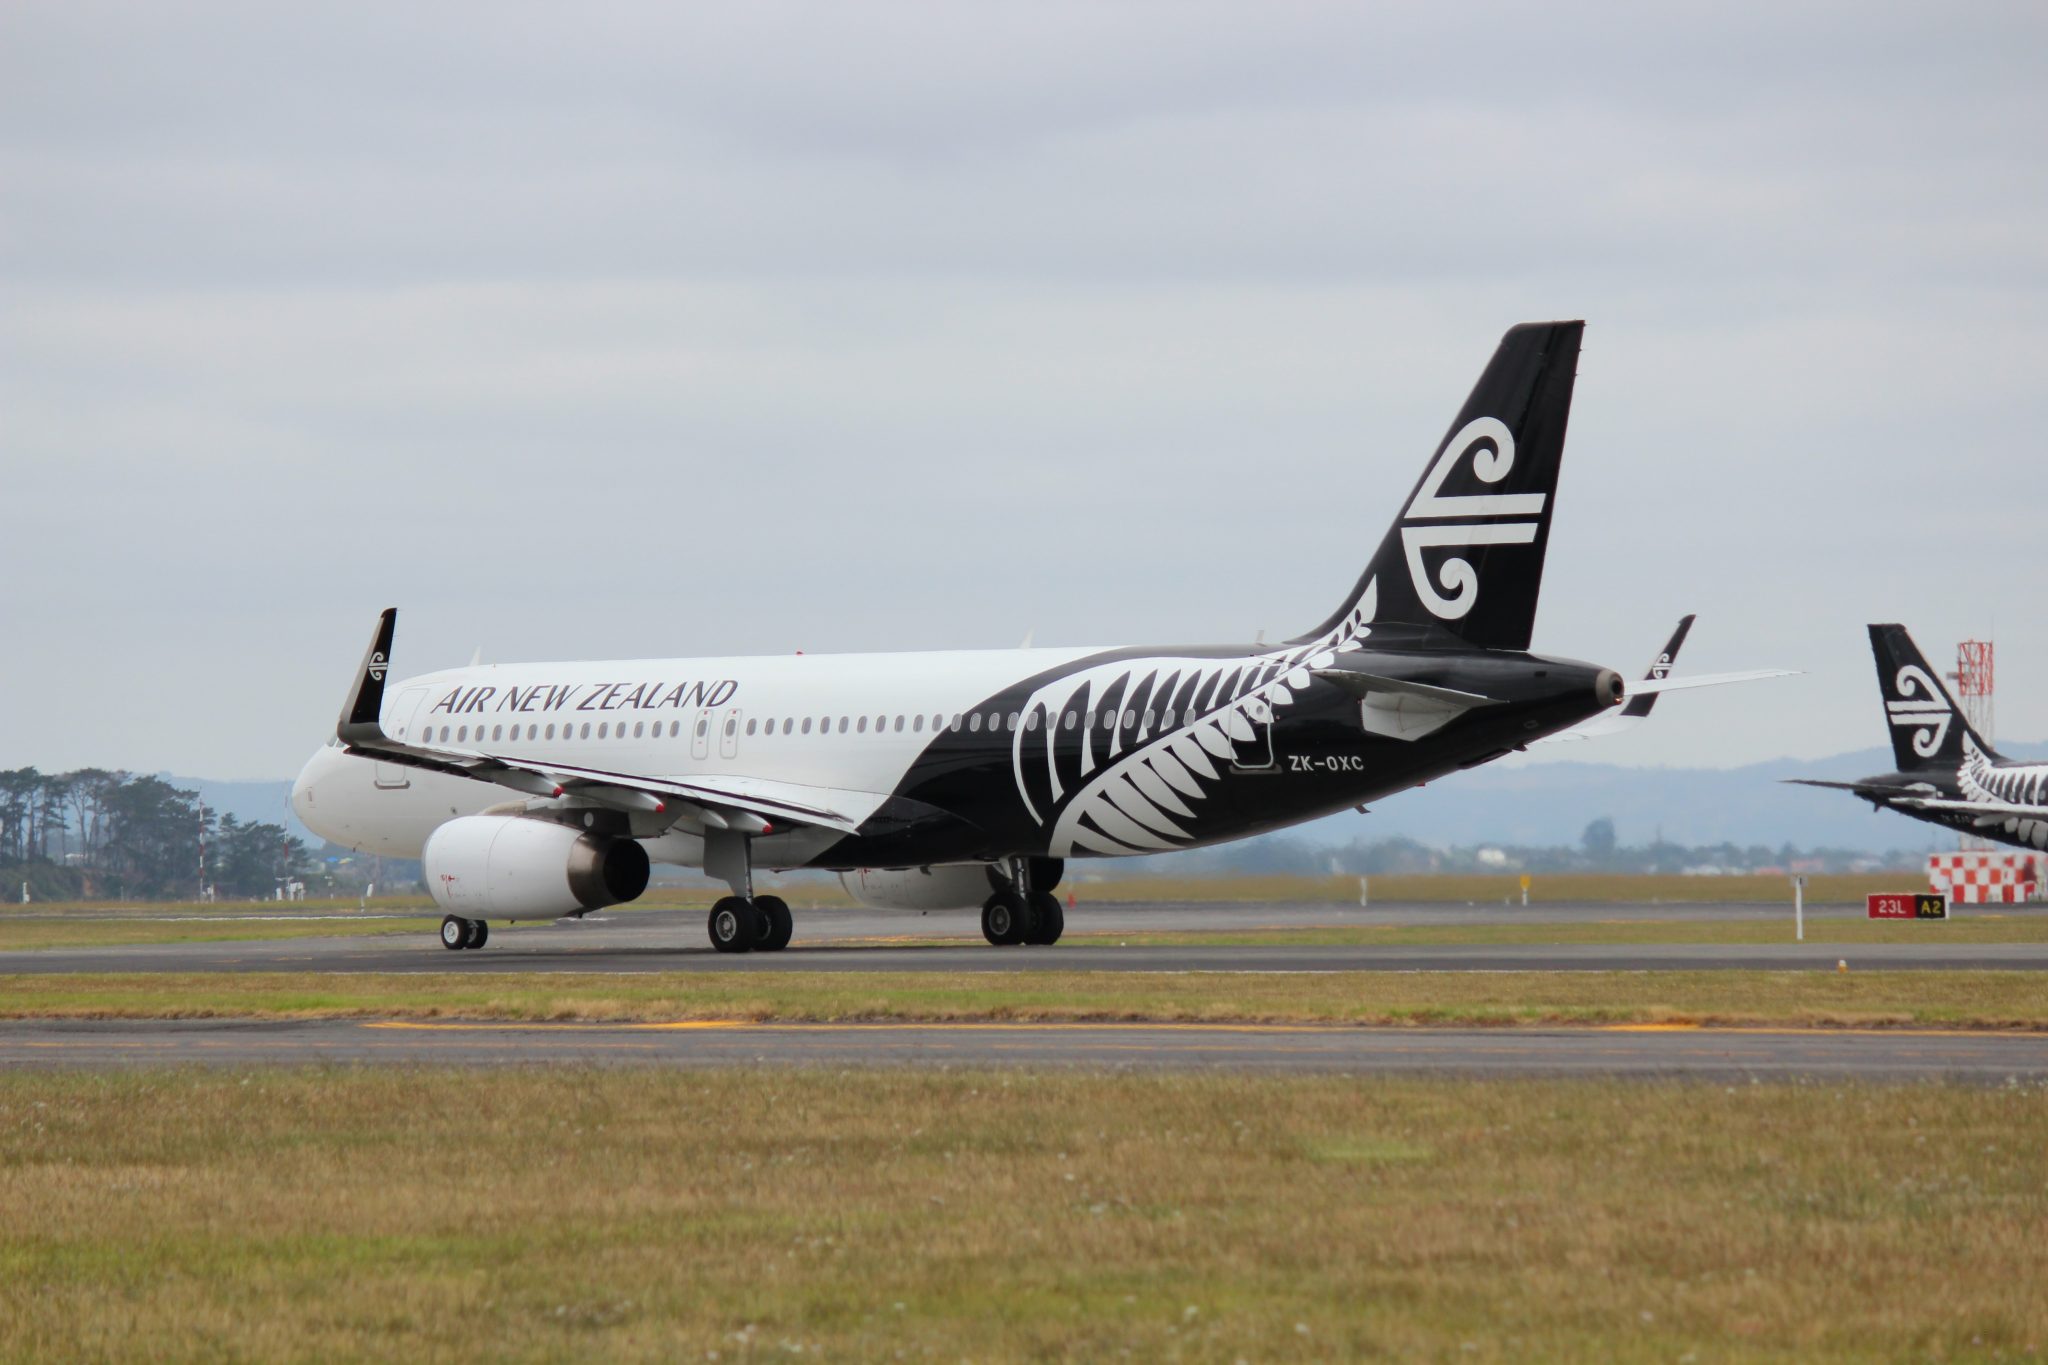 Air New Zealand has added more seats, more business-timed flights and brought on more crew to meet increased demand for corporate travel.